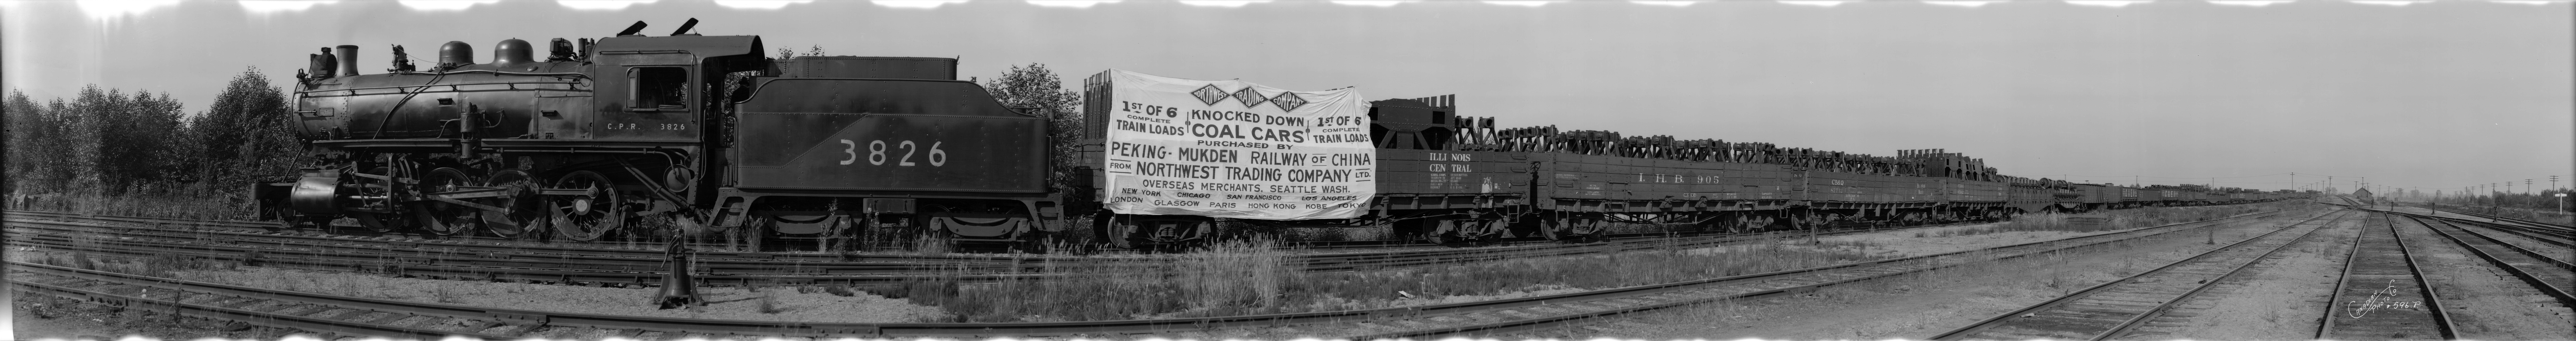 Train load of coal cars purchased by the Peking-Mukden Railway of ...